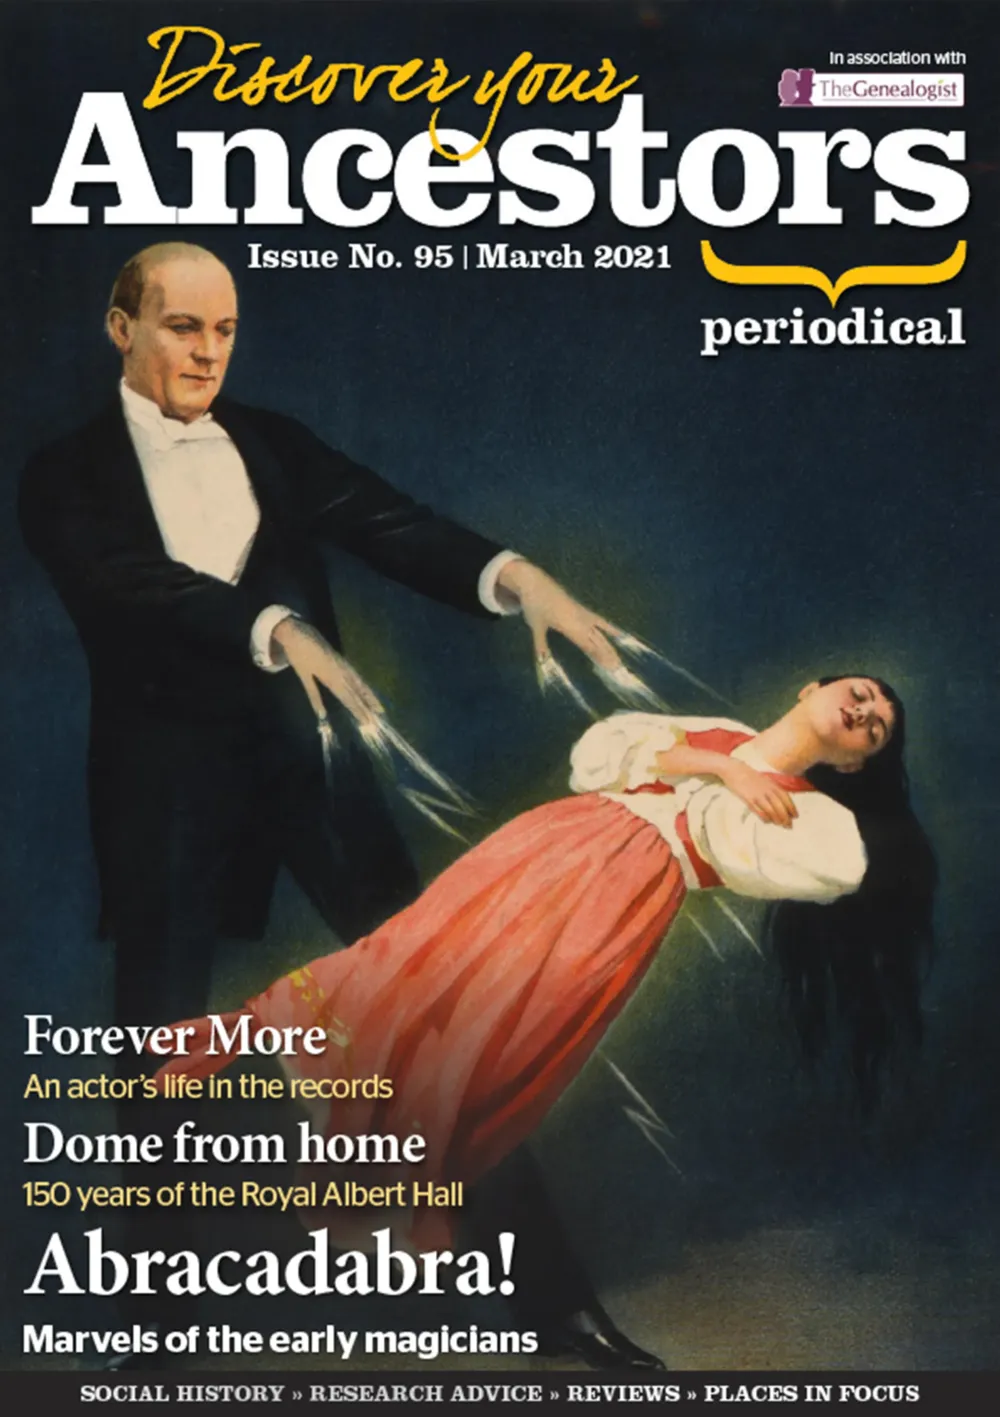 Discover Your Ancestors Periodical - March 2021